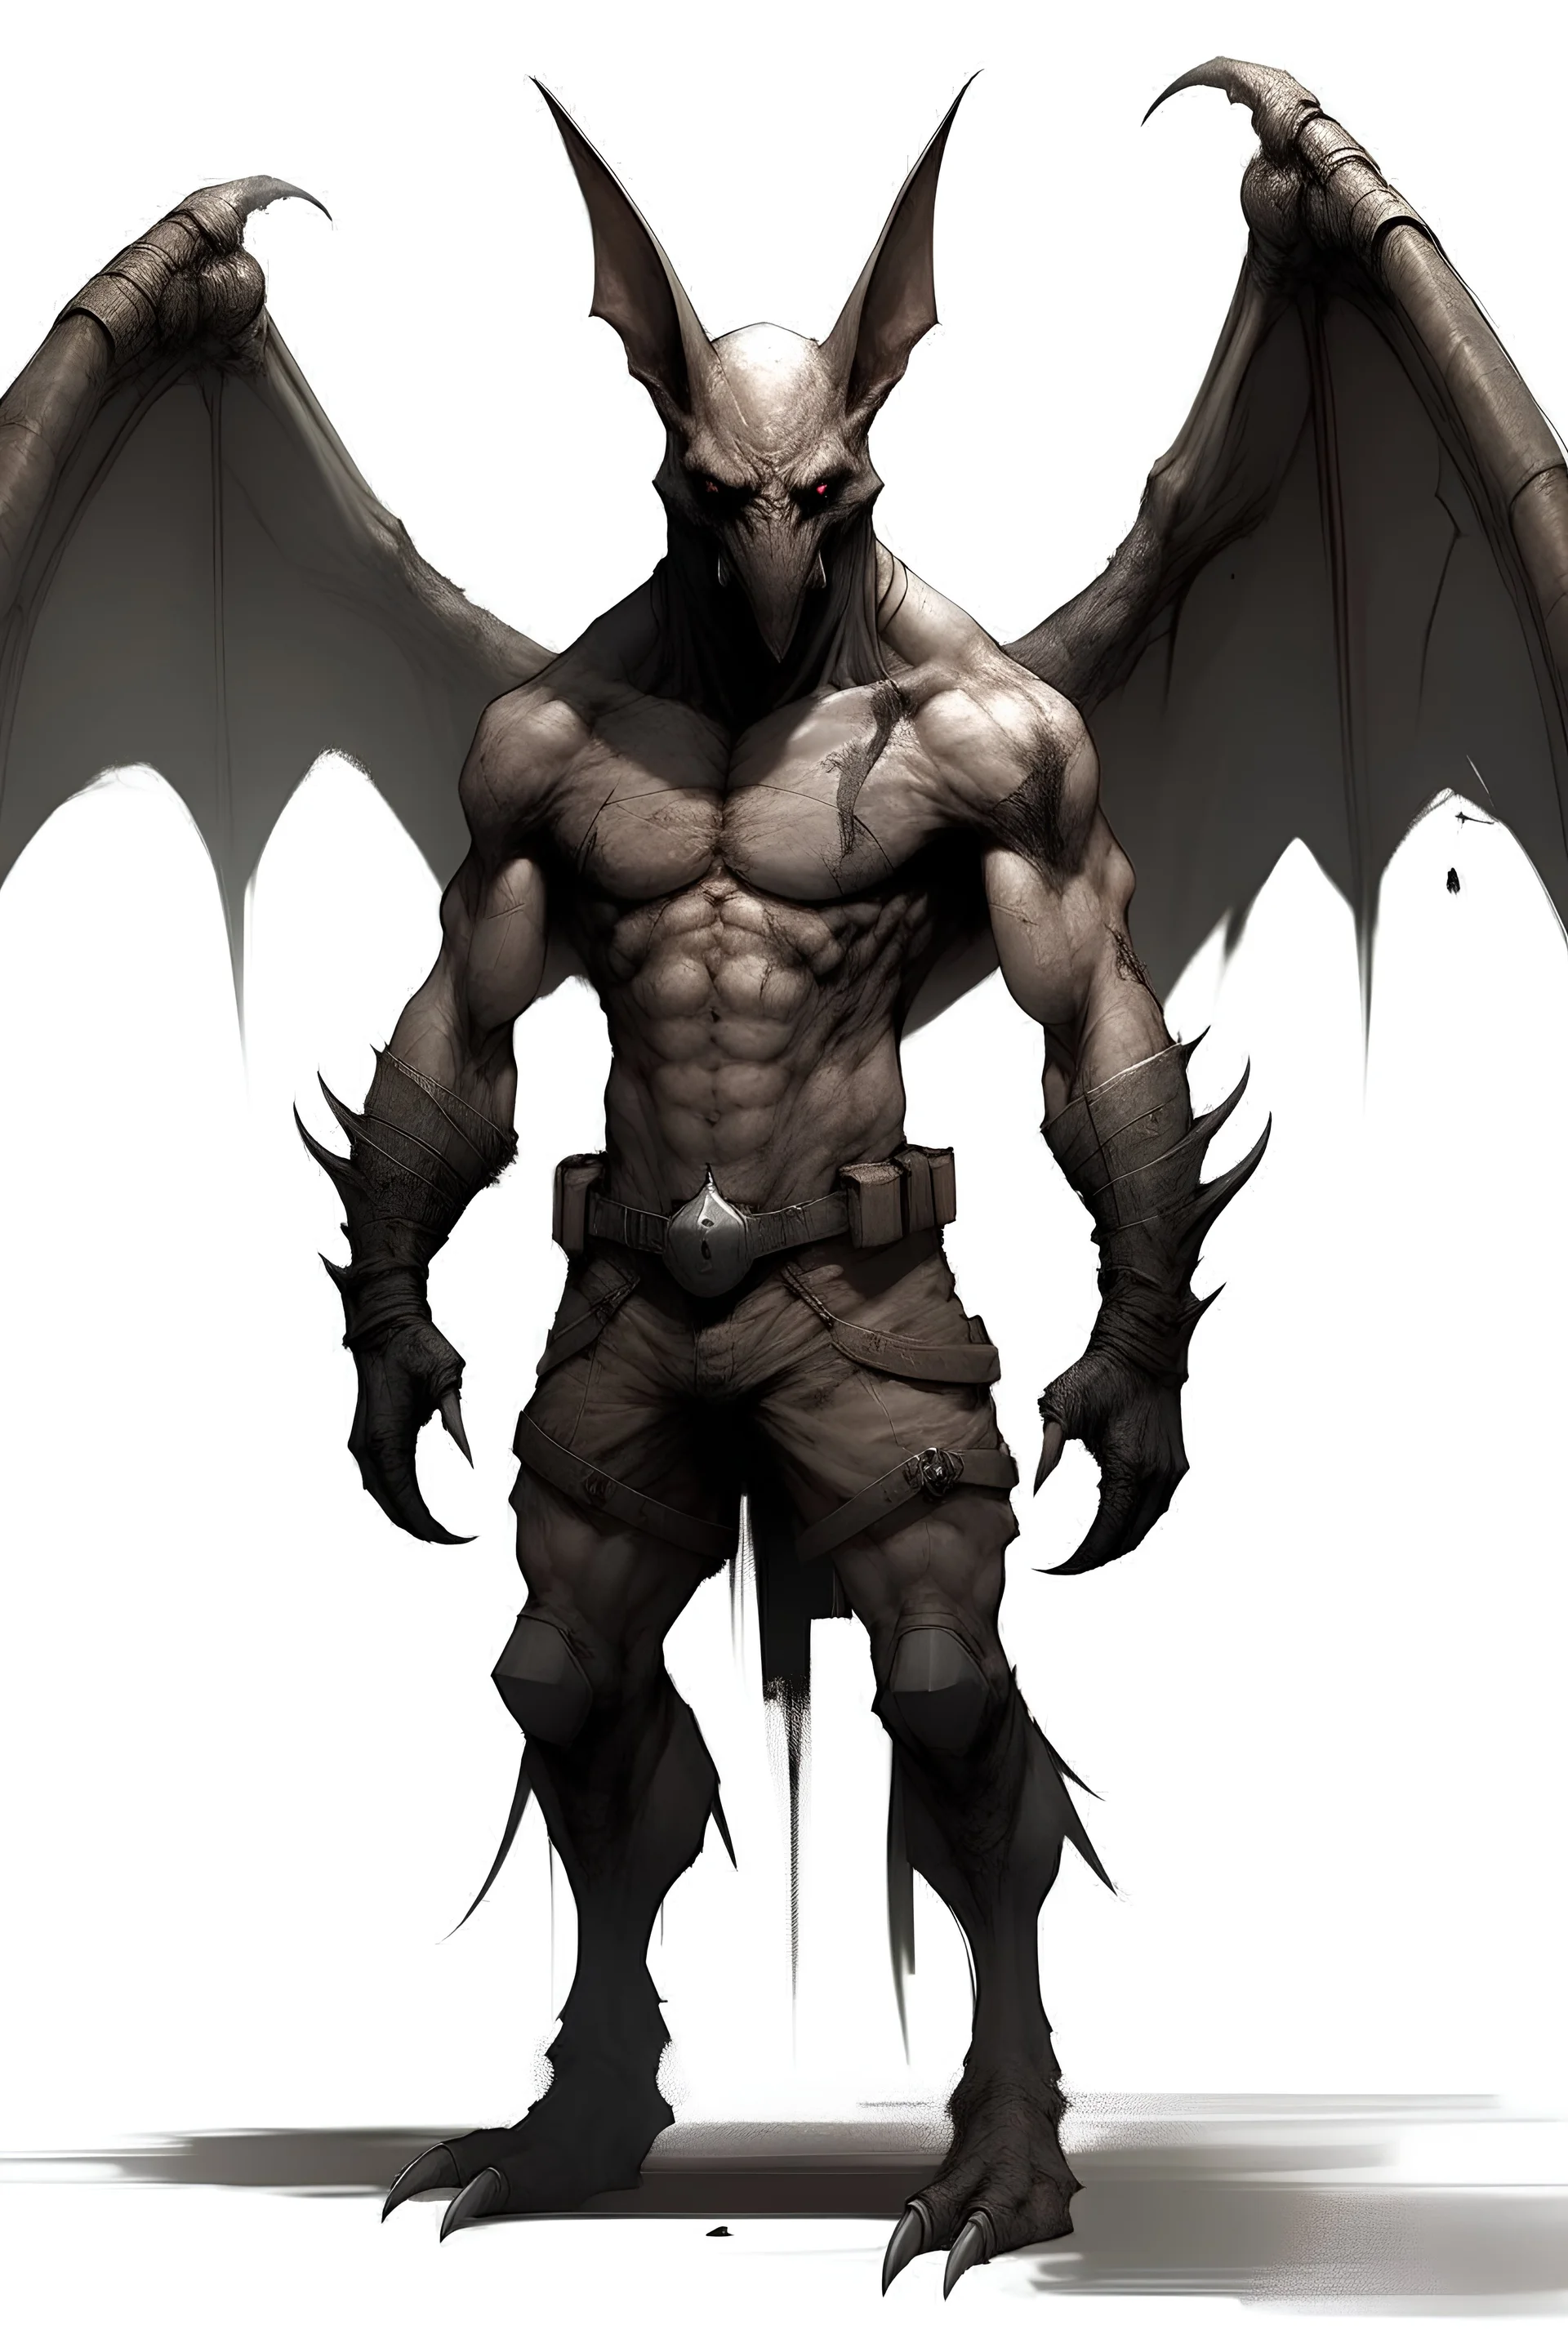 oversized, muscular, anthro bat, full body, post-apocalyptic, concept art, blank background